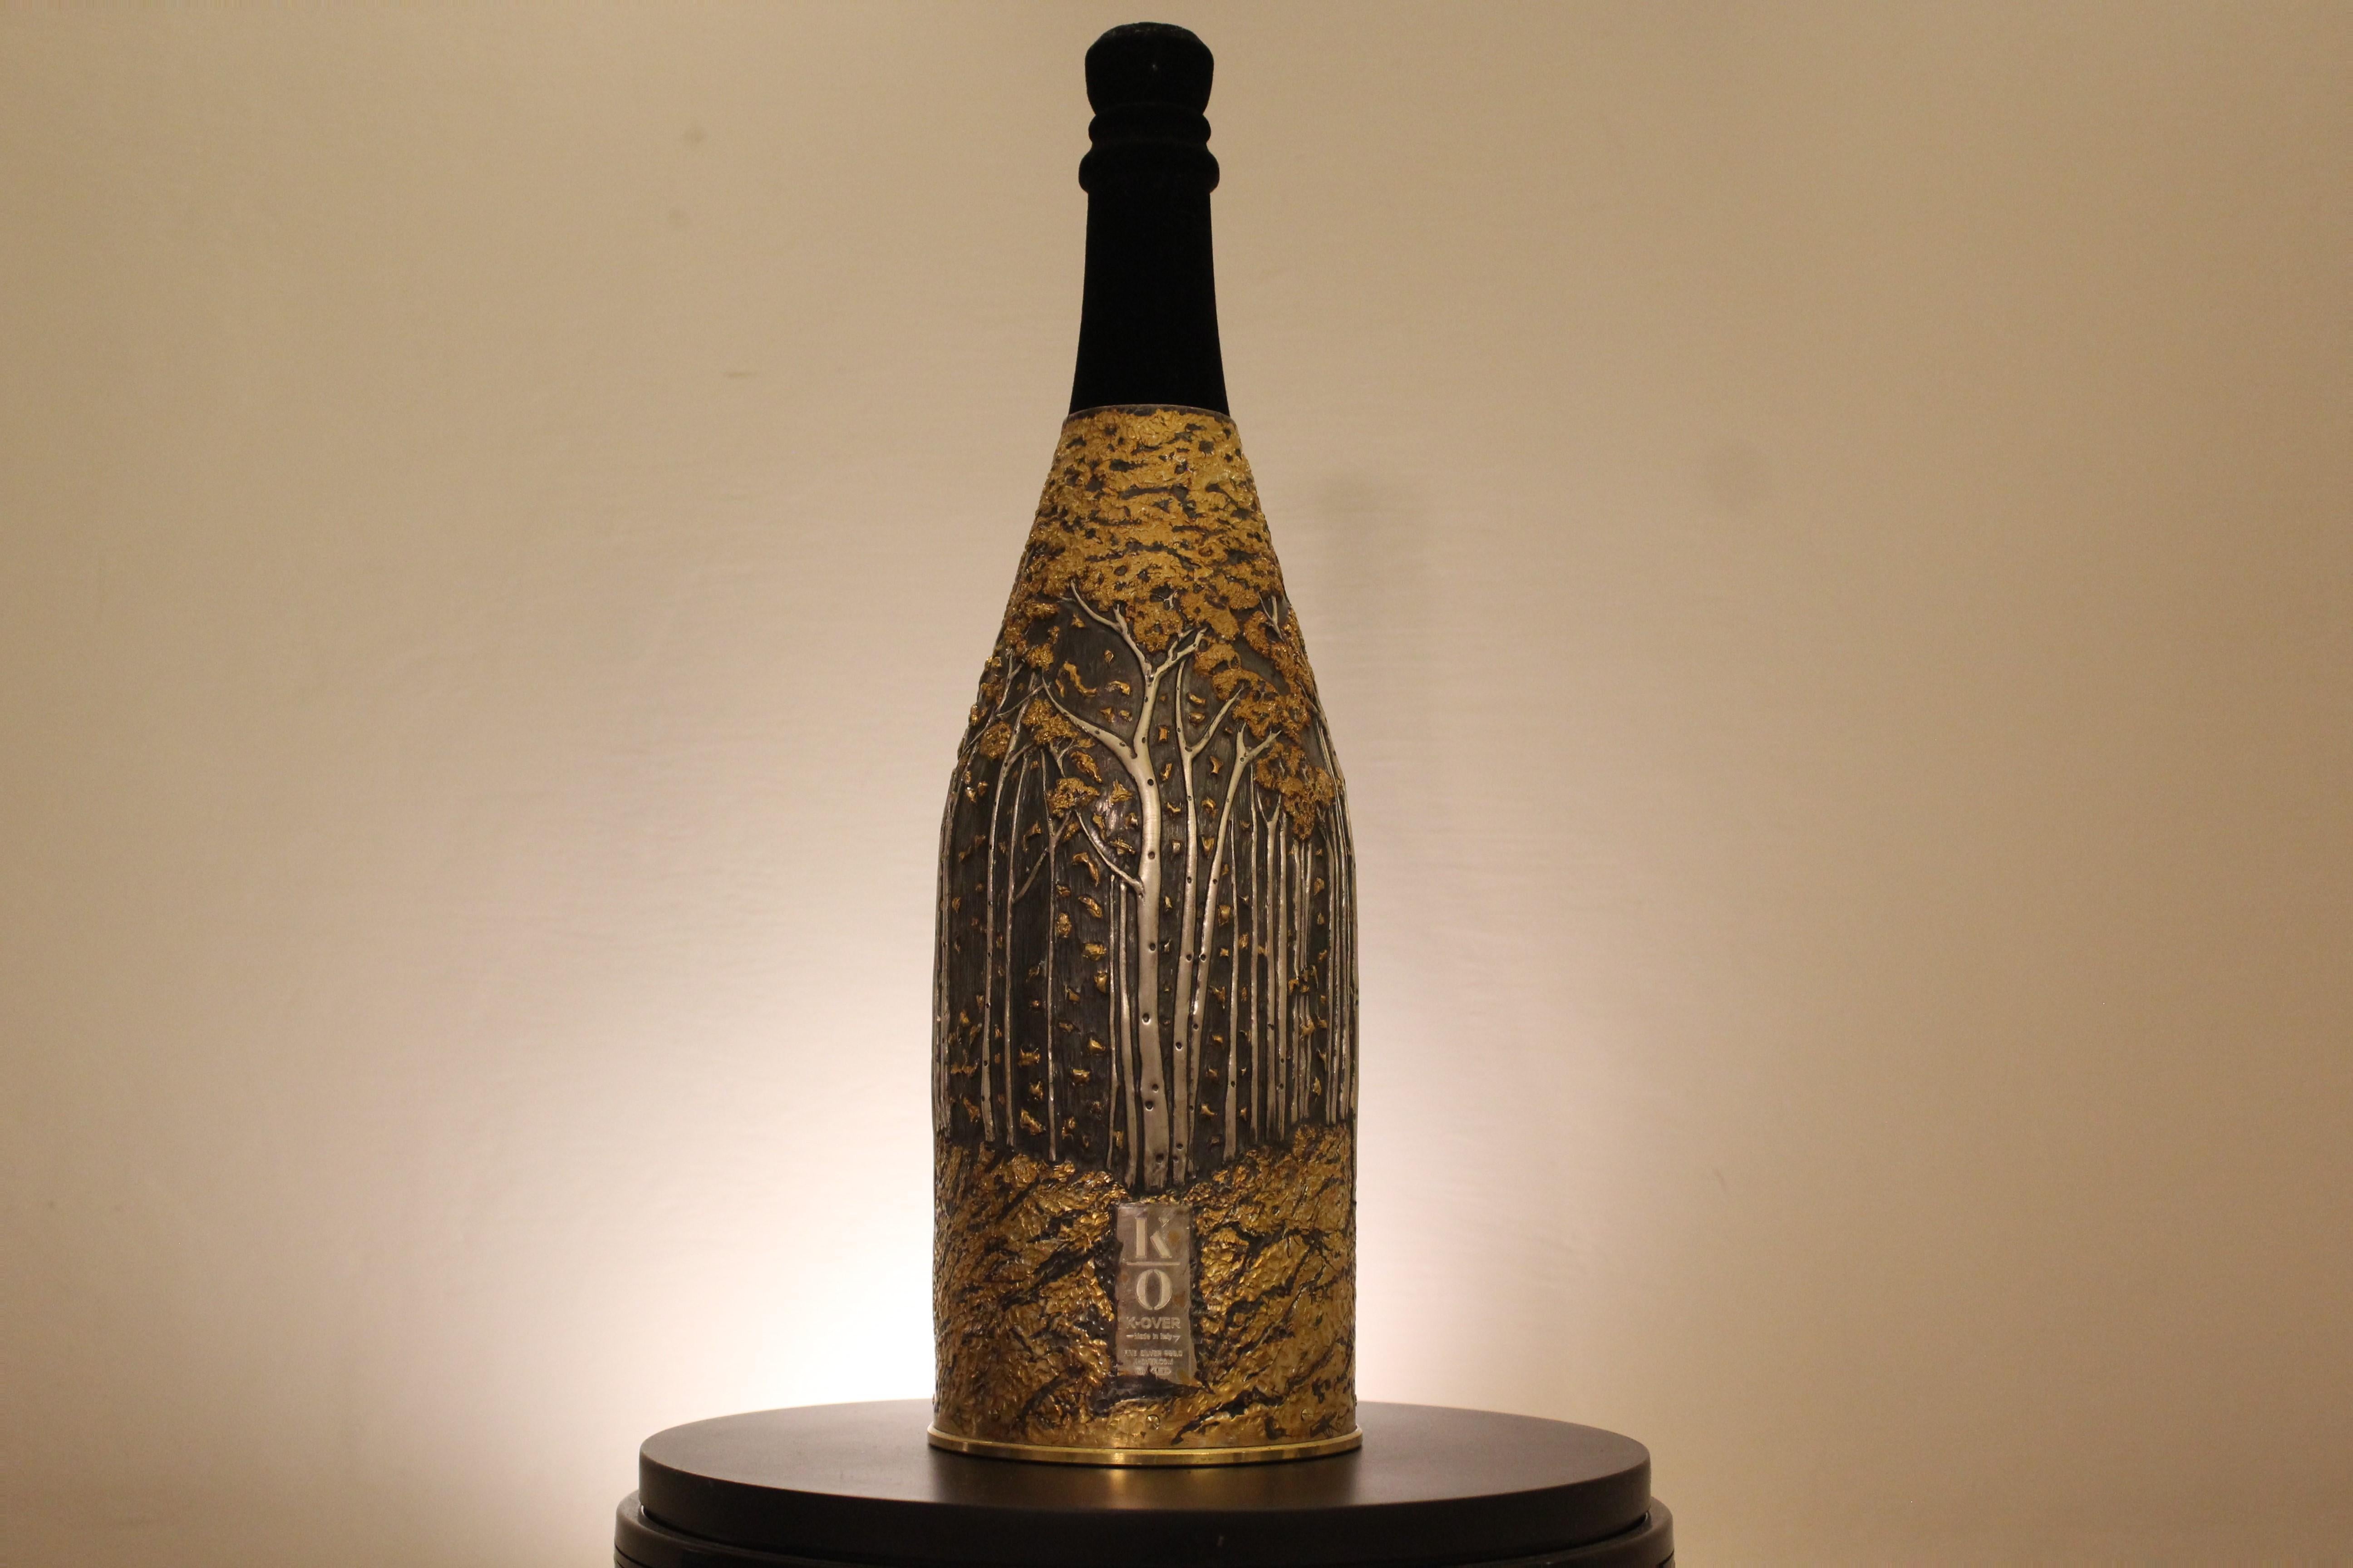 Contemporary K-OVER Champagne, 21st Century, Solid Pure Silver, Wood in Autumn, Italy For Sale